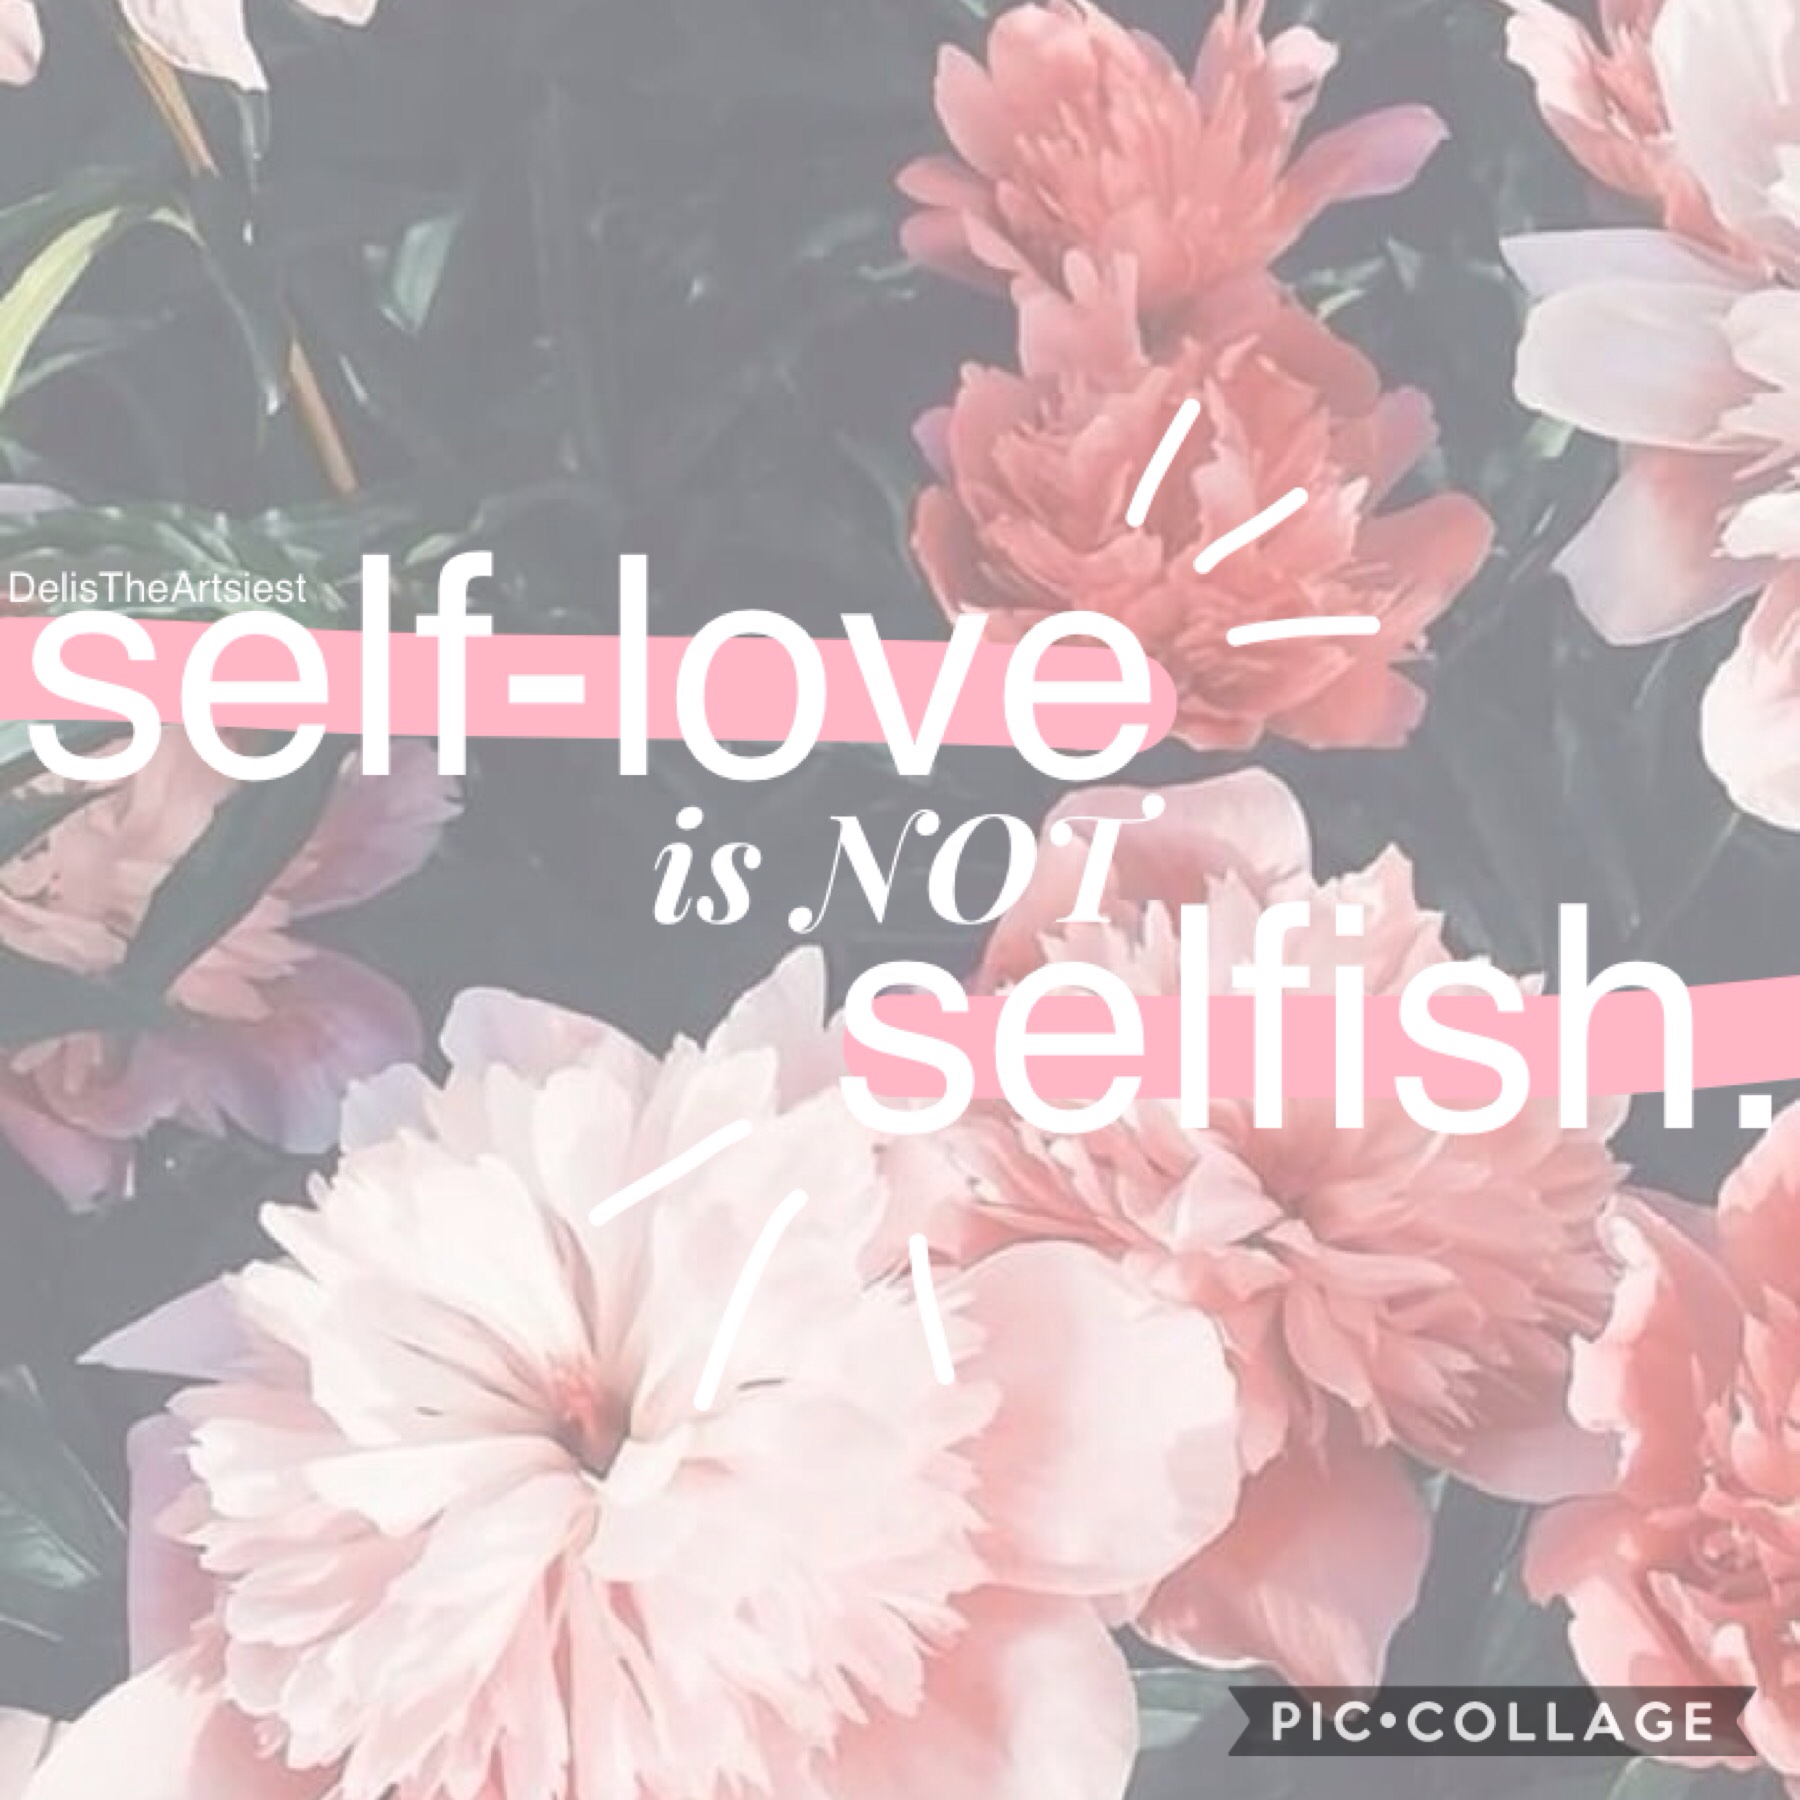 TAP
I don't know about you guys but it is really, really hard to love yourself. All I see in myself are the bad things and the flaws. I feel like I have to be something better than what I am. But I'm not exactly sure what "better" is. So, right now, I don